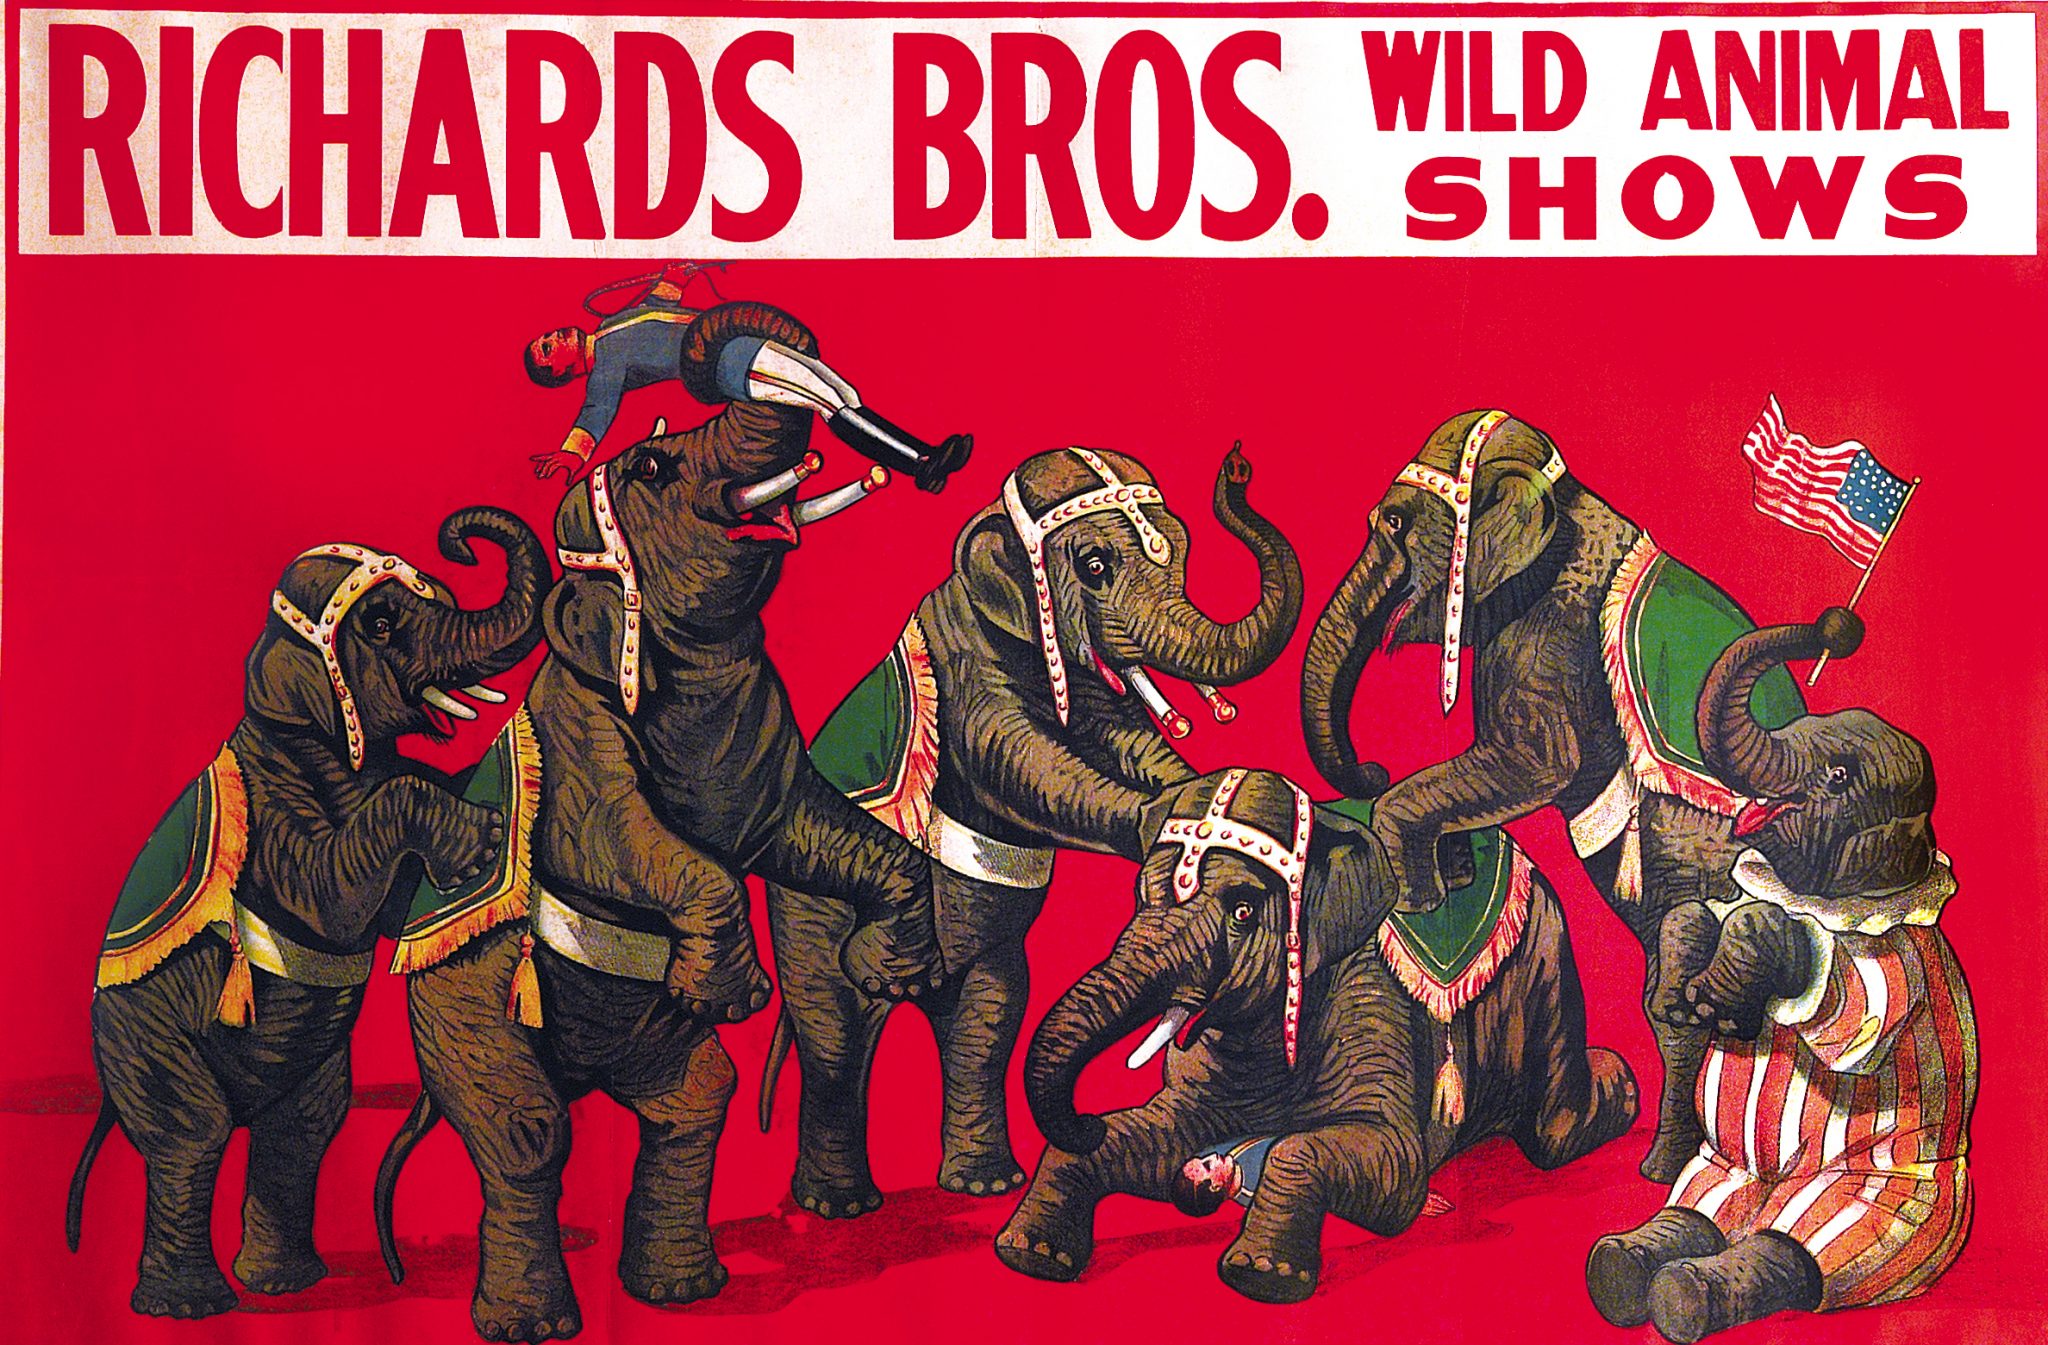 Vintage Poster, Richard Bros./Wild Animal Shows, c.1900. Park West Gallery Collection.